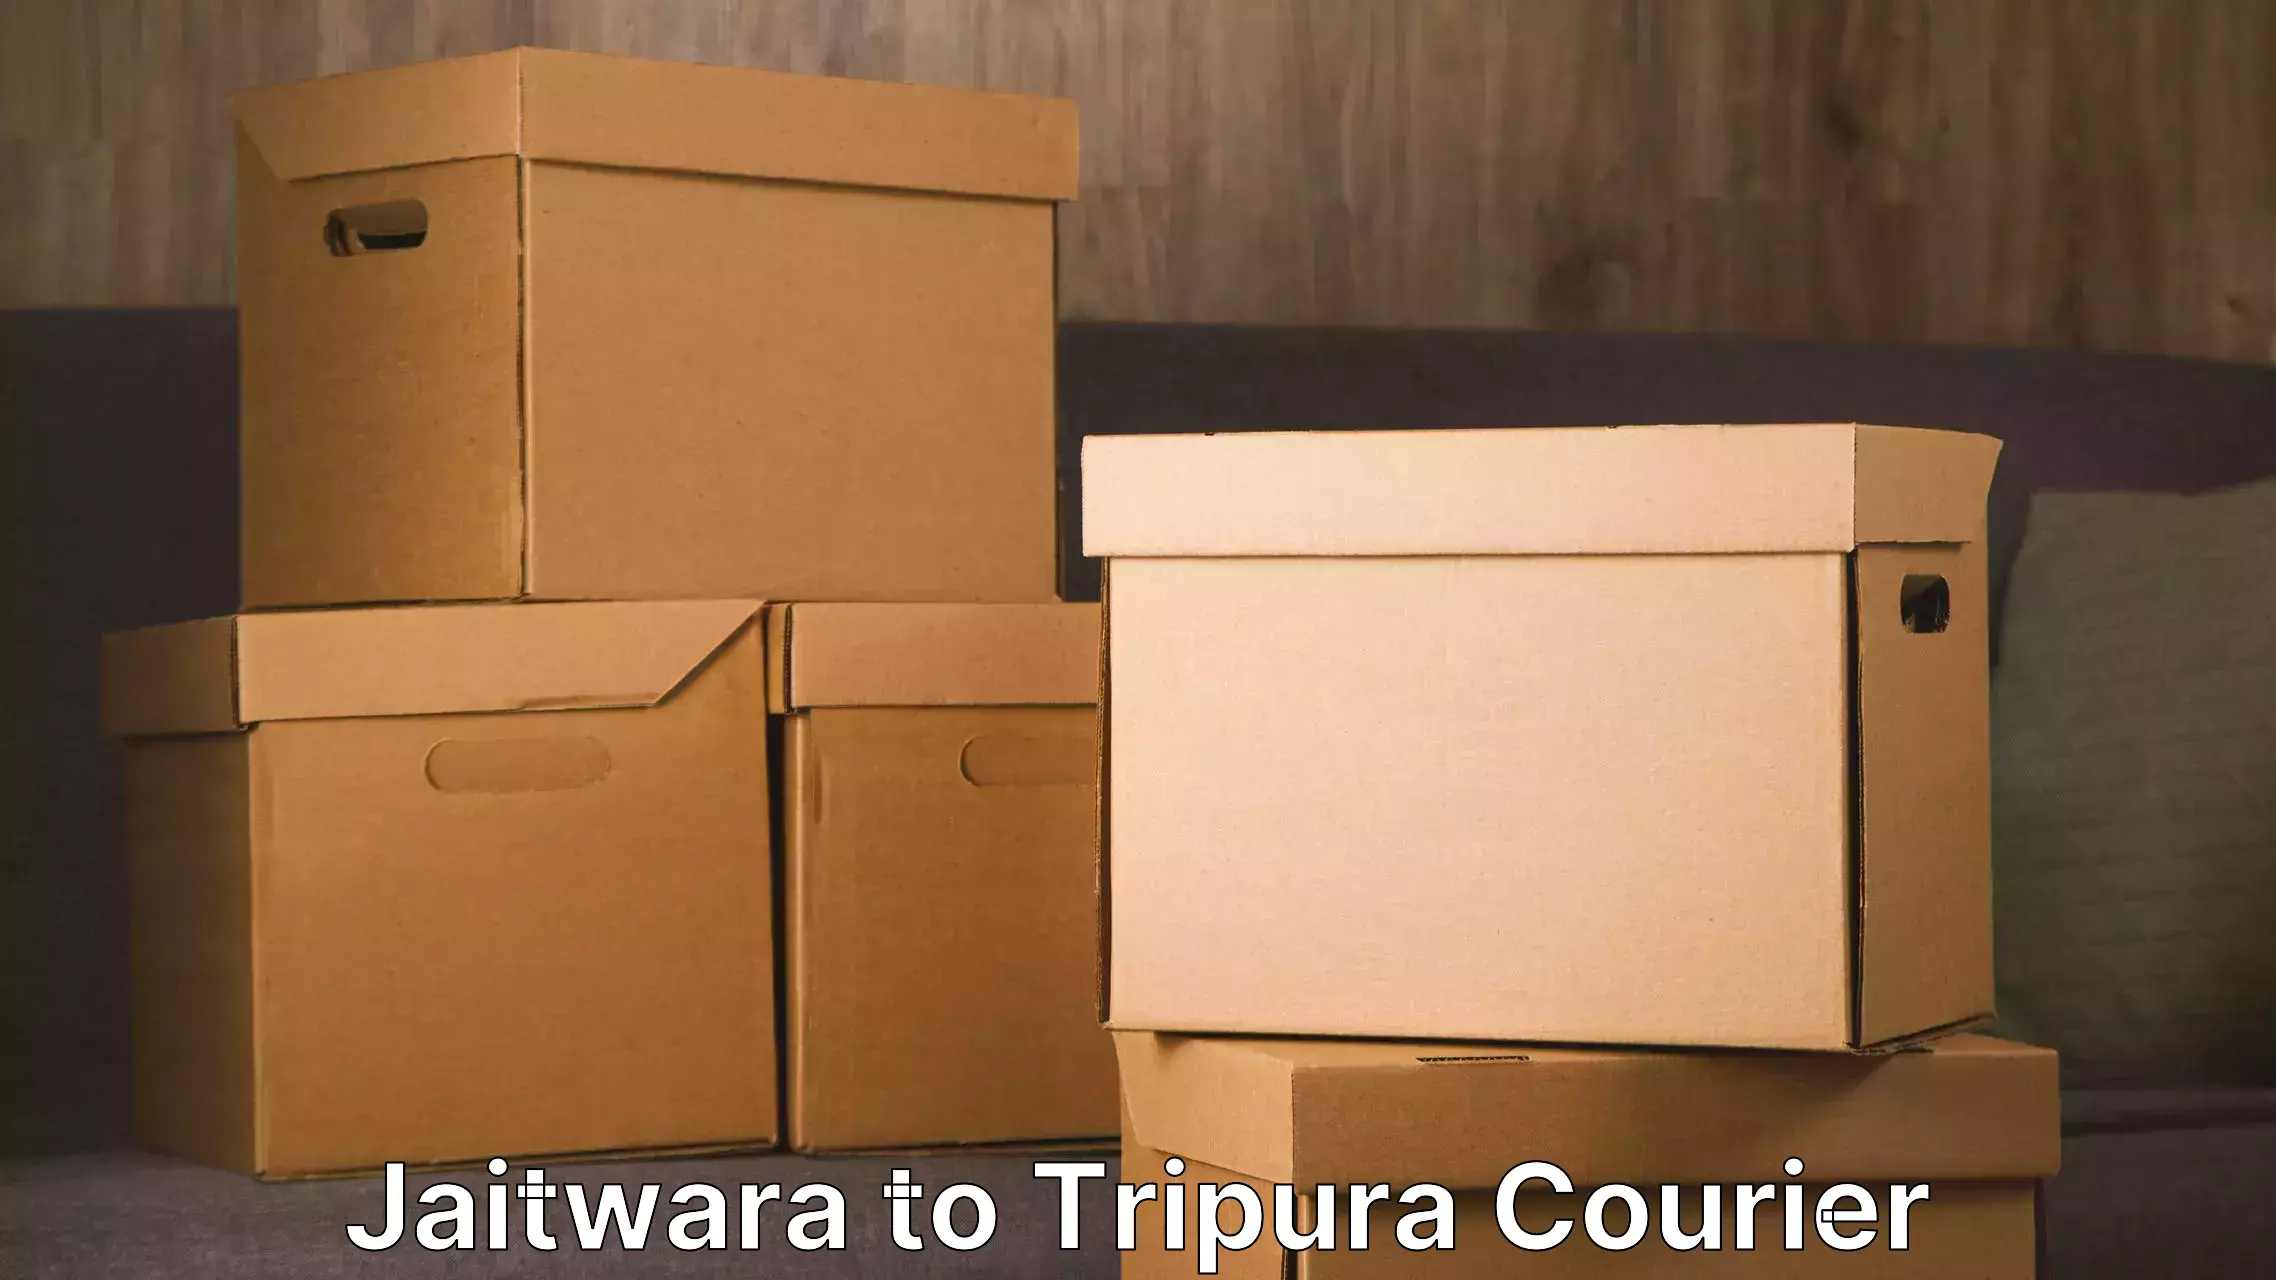 Trusted relocation services in Jaitwara to Kailashahar